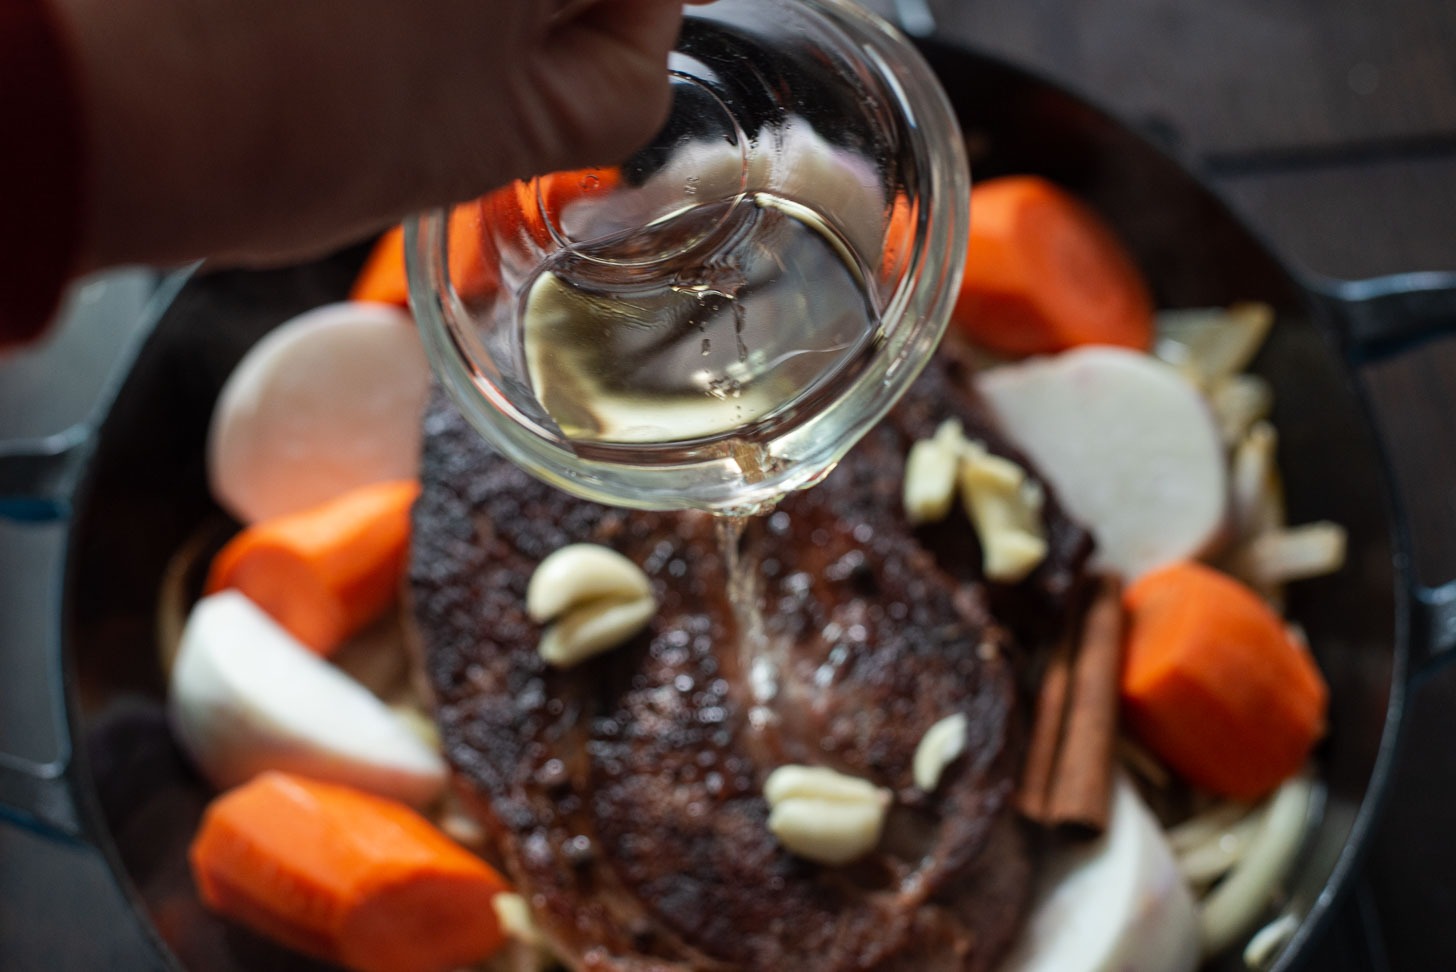 Vinegar is being added to the beef, carrot, turnip in a braising pan.